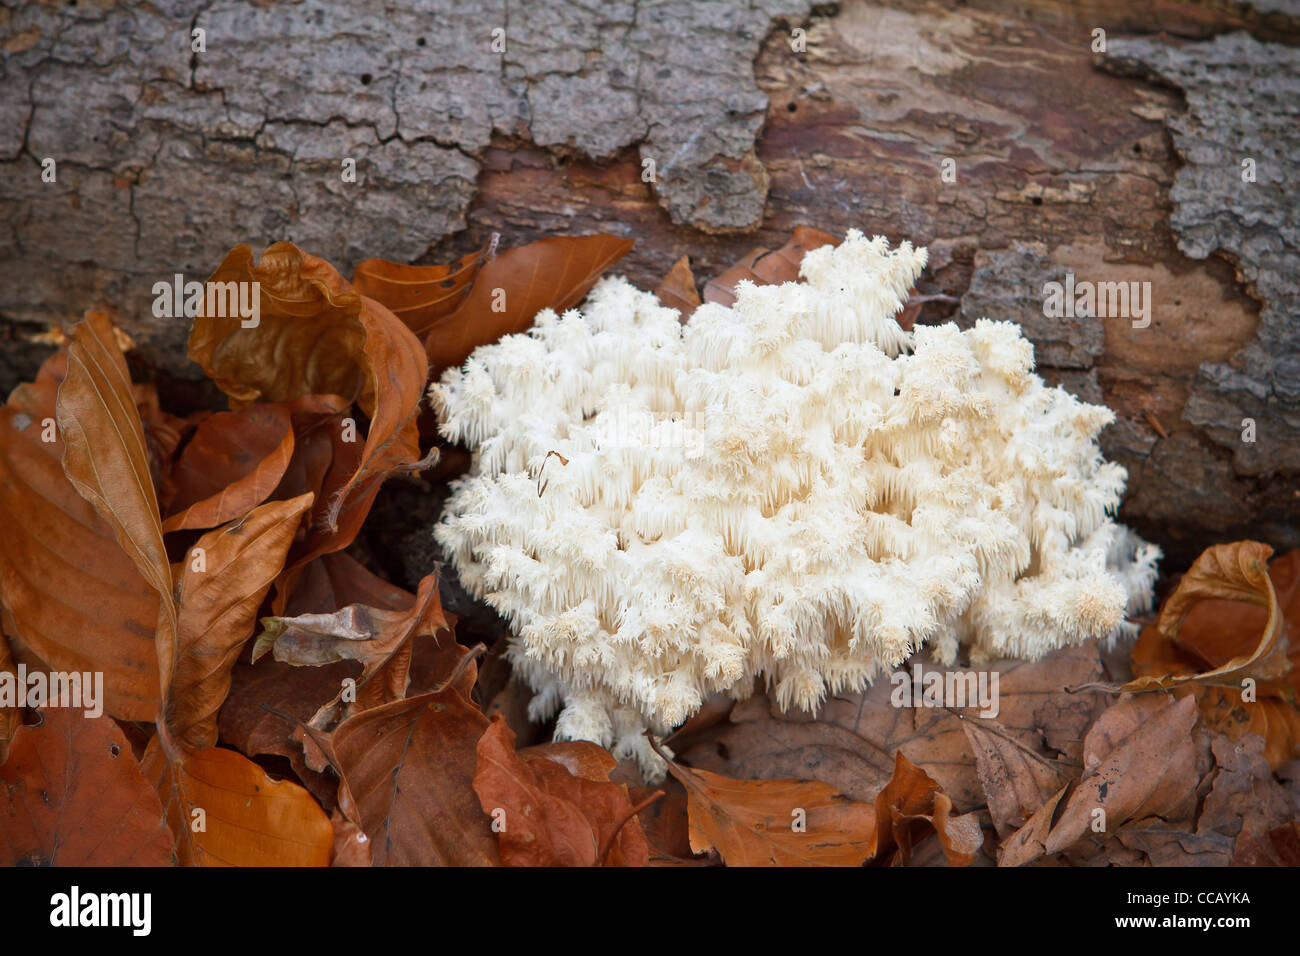 Coral tooth (Hericium coralloides, Hericium clathroides) on dead wood. Stock Photo